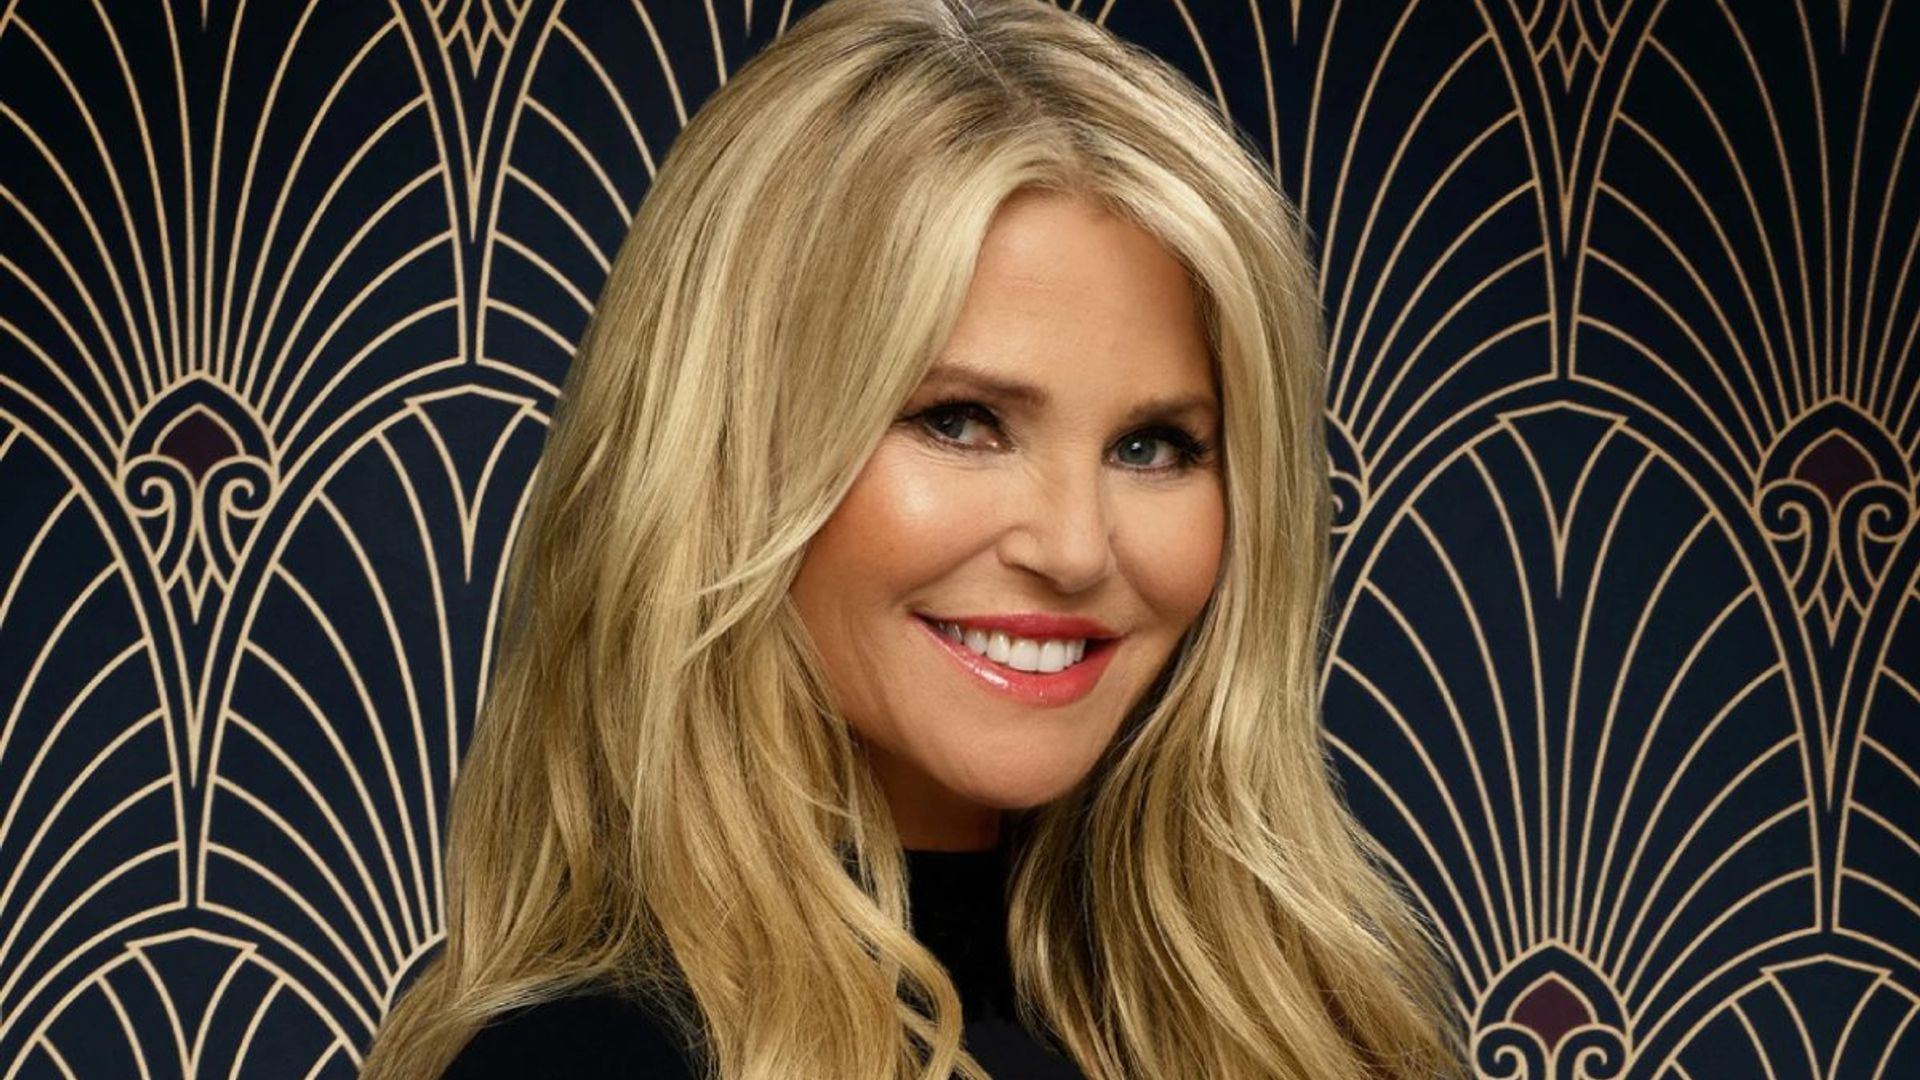 Exclusive: Christie Brinkley is still not 'recovered' after devastating Dancing with the Stars injury